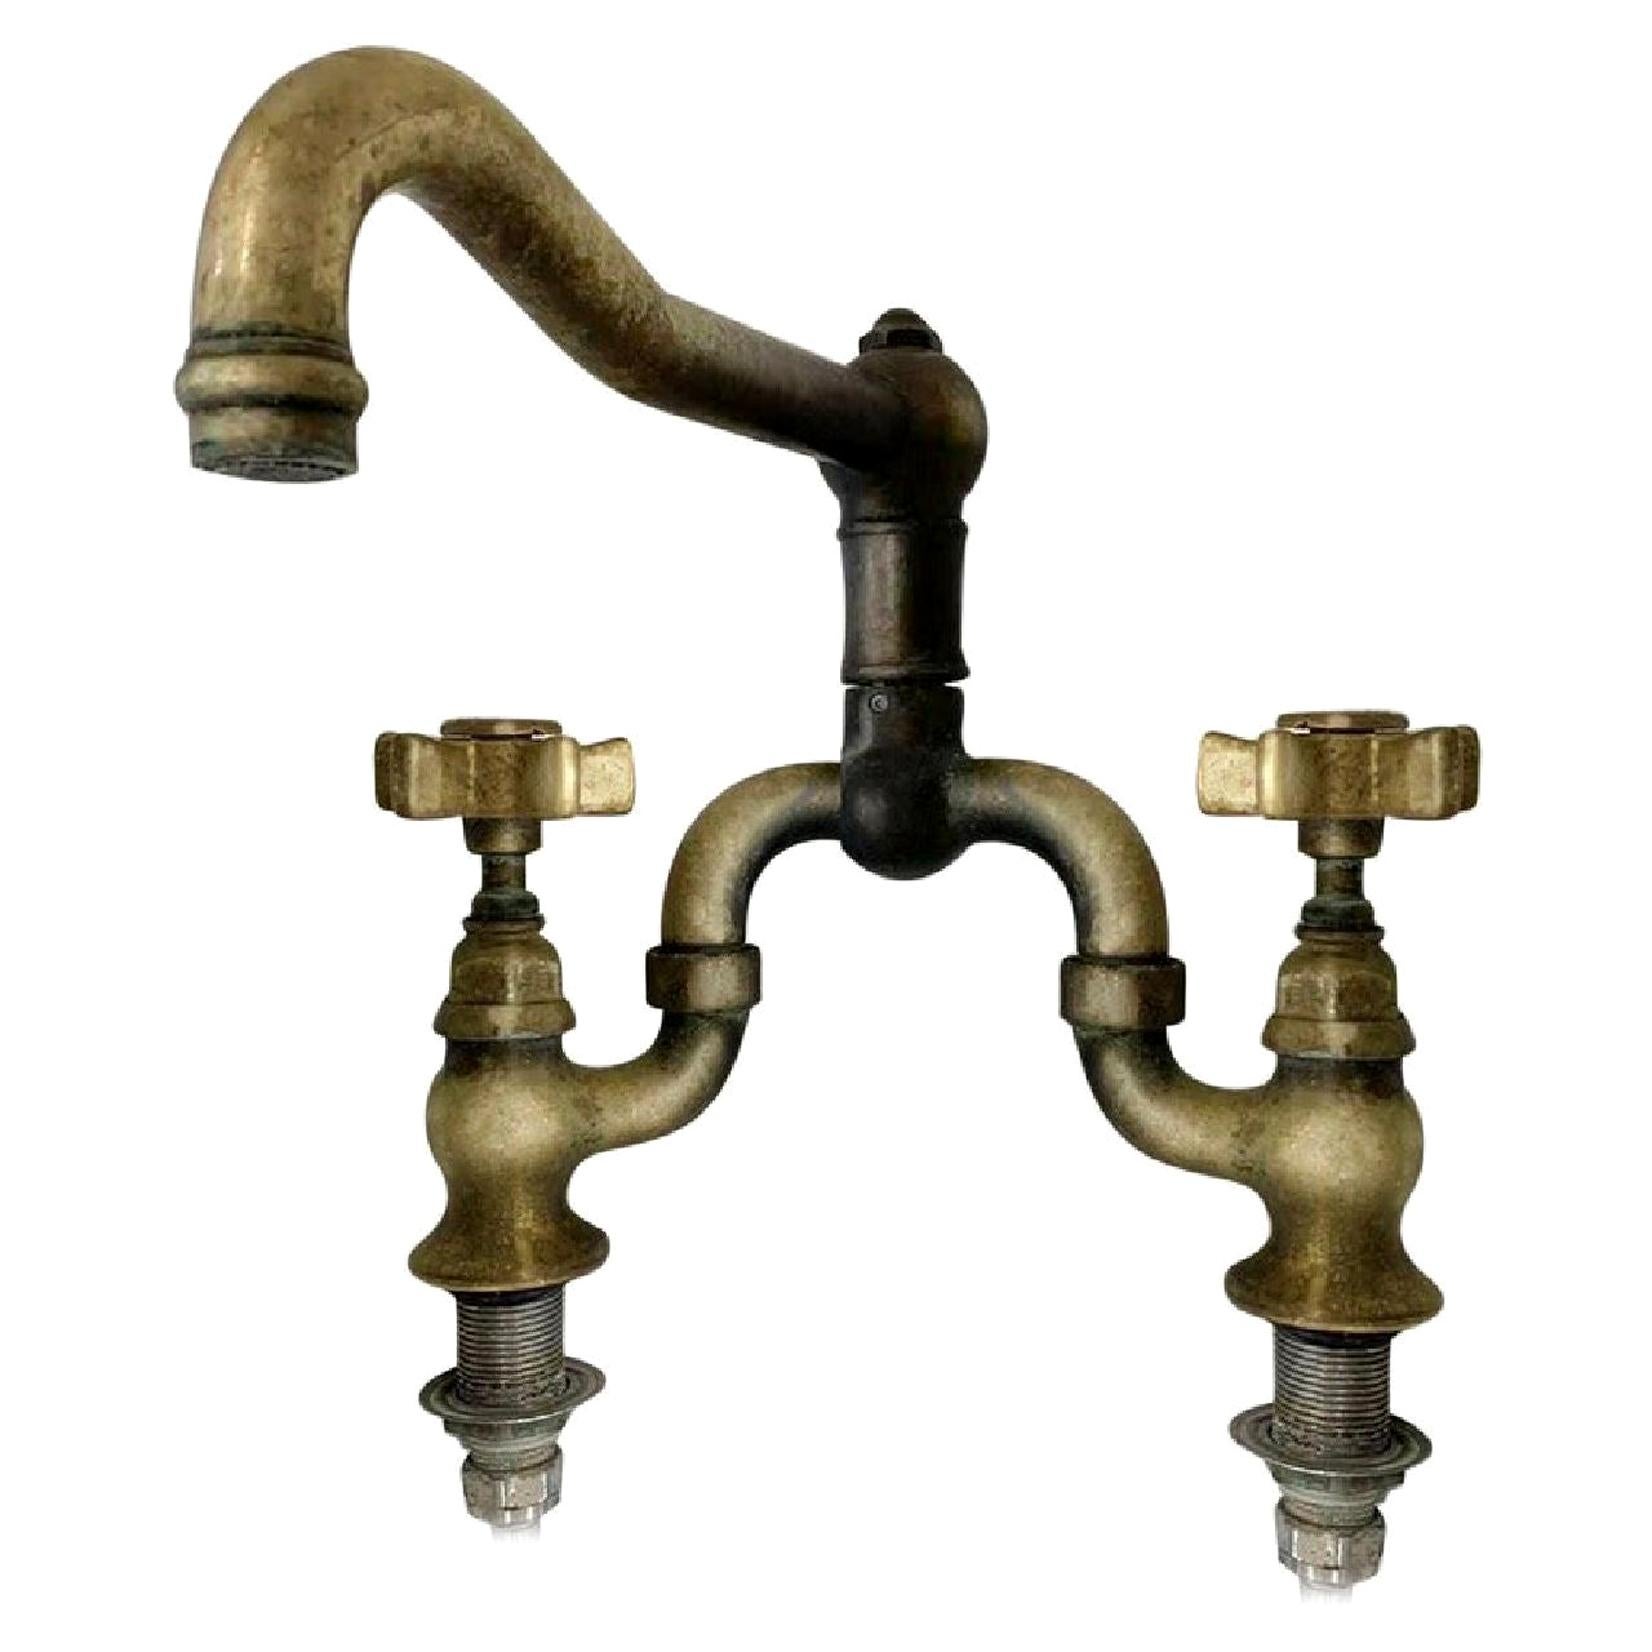 Vintage Unlaquered Brass Italian Country Bridge Faucet by Rohl, Living Finish